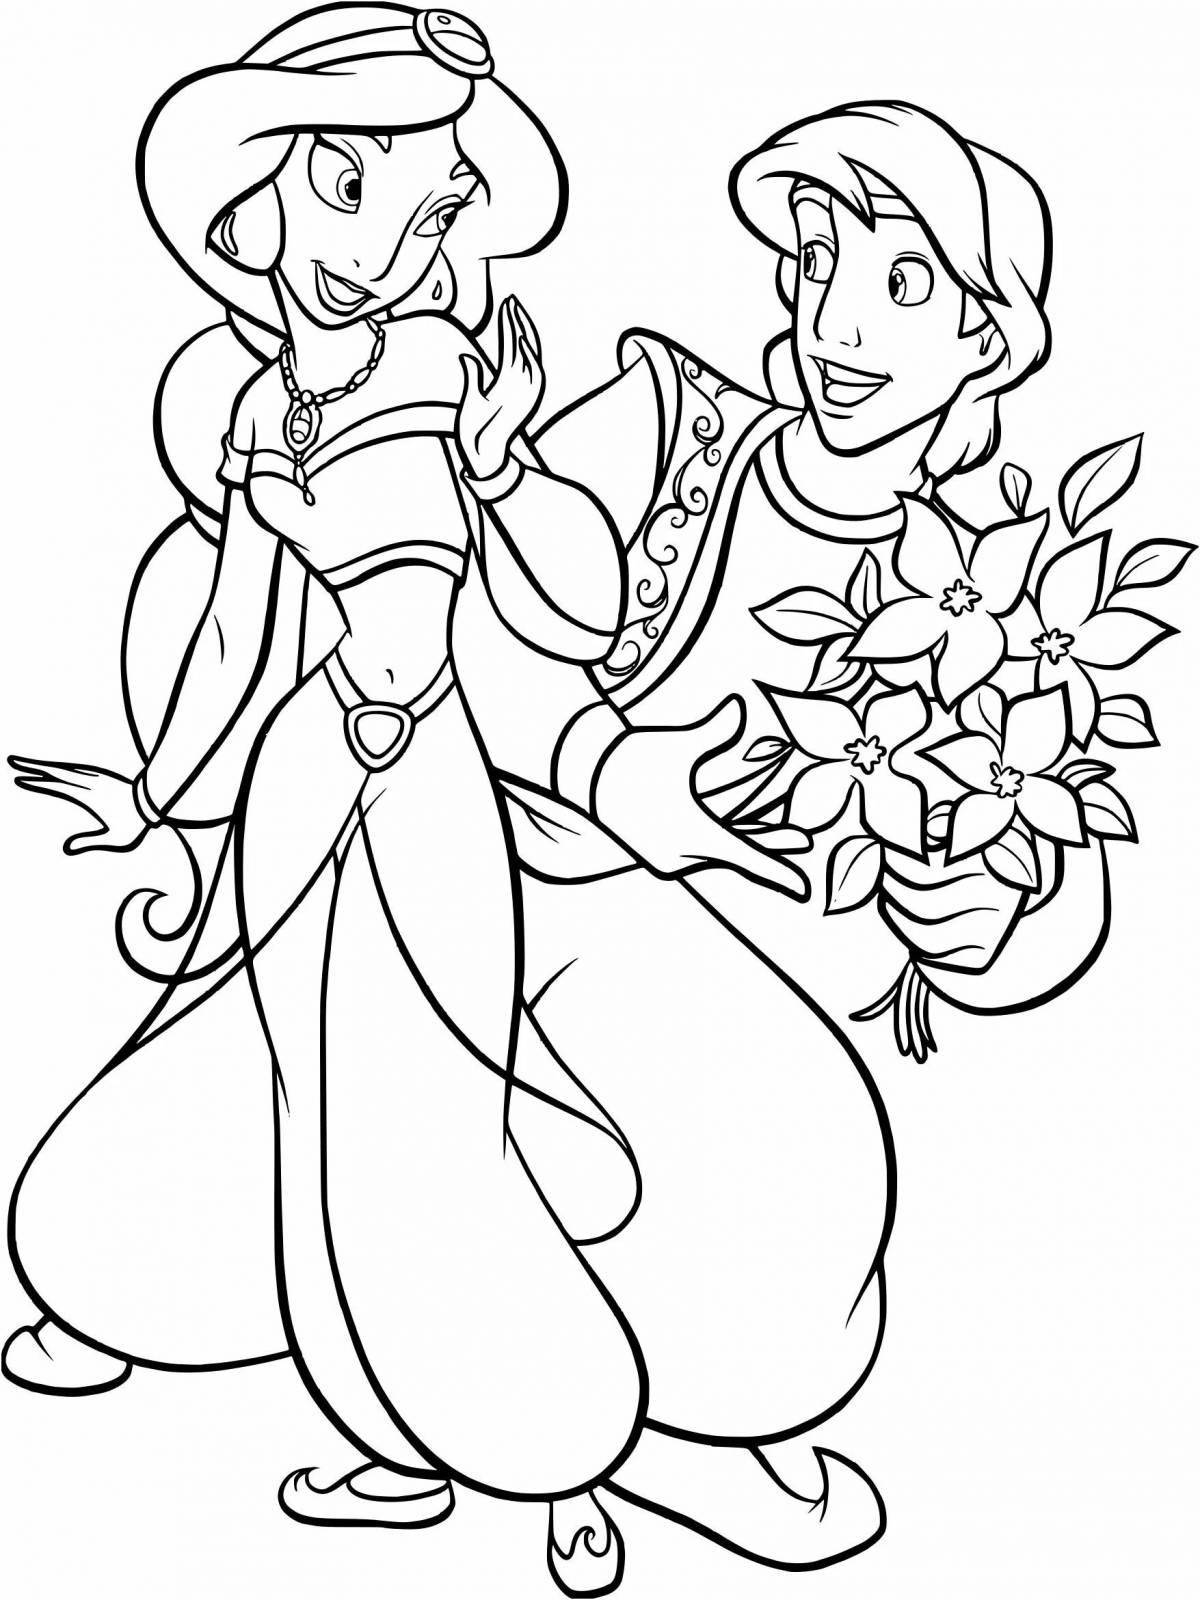 Playful jasmine coloring page